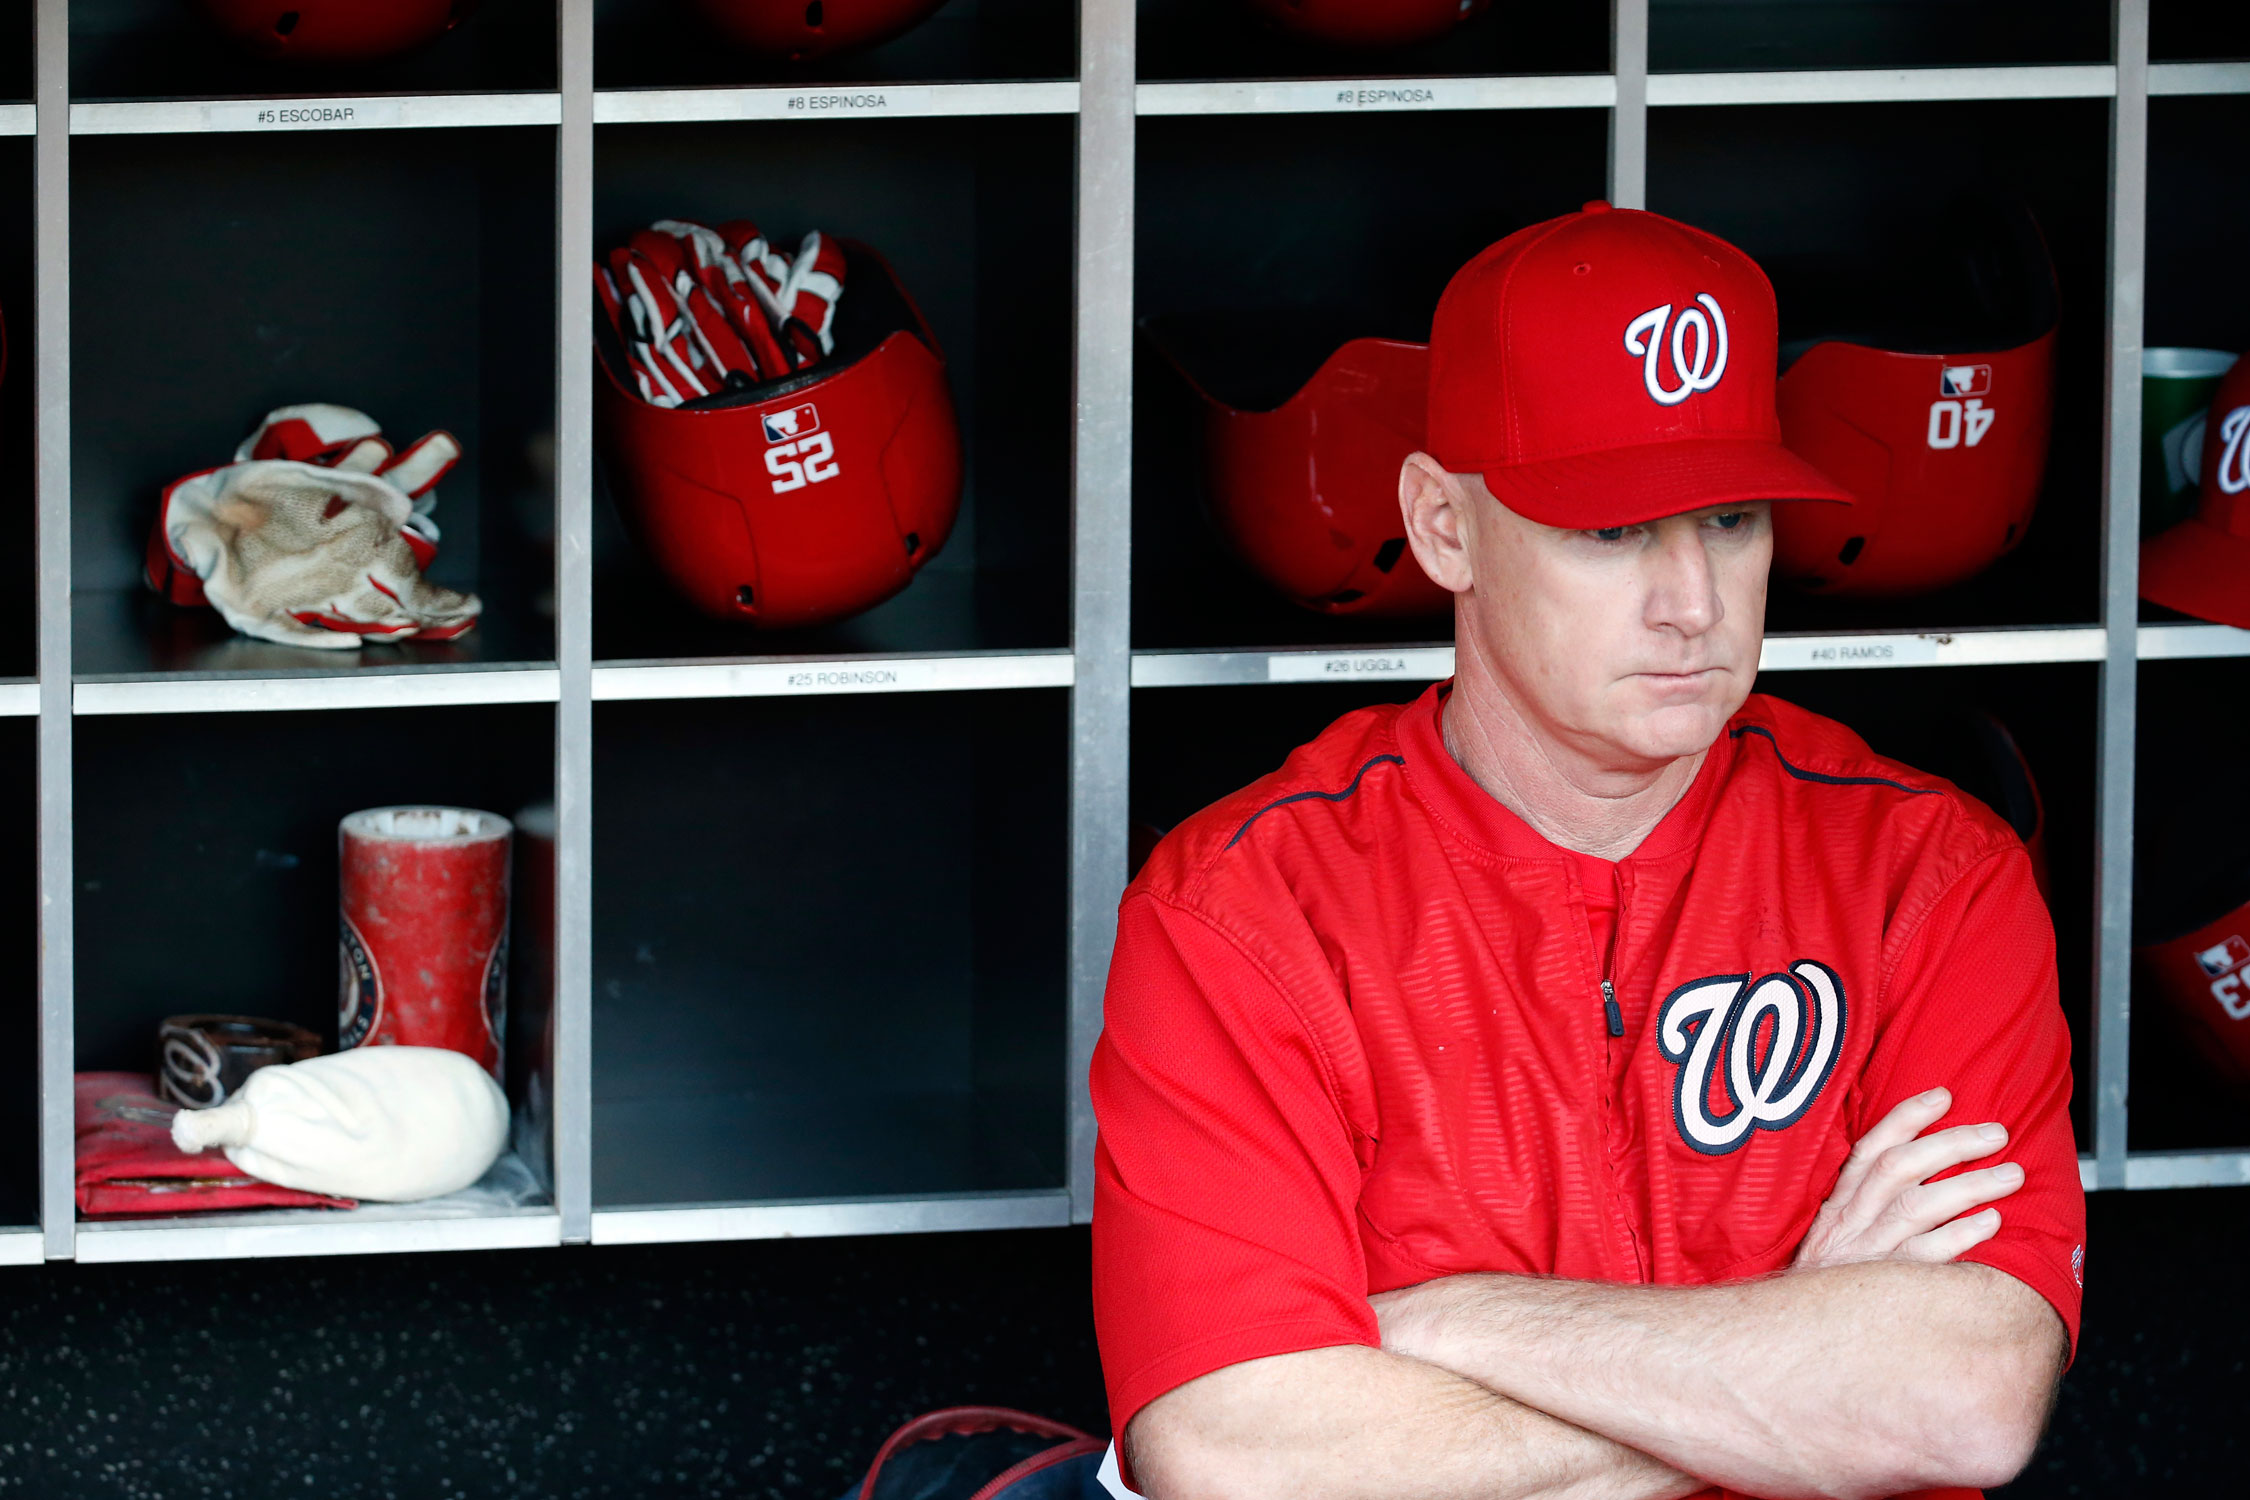 Column: 500 days of the boys of summer, or why the Nats need to fire Matt Williams